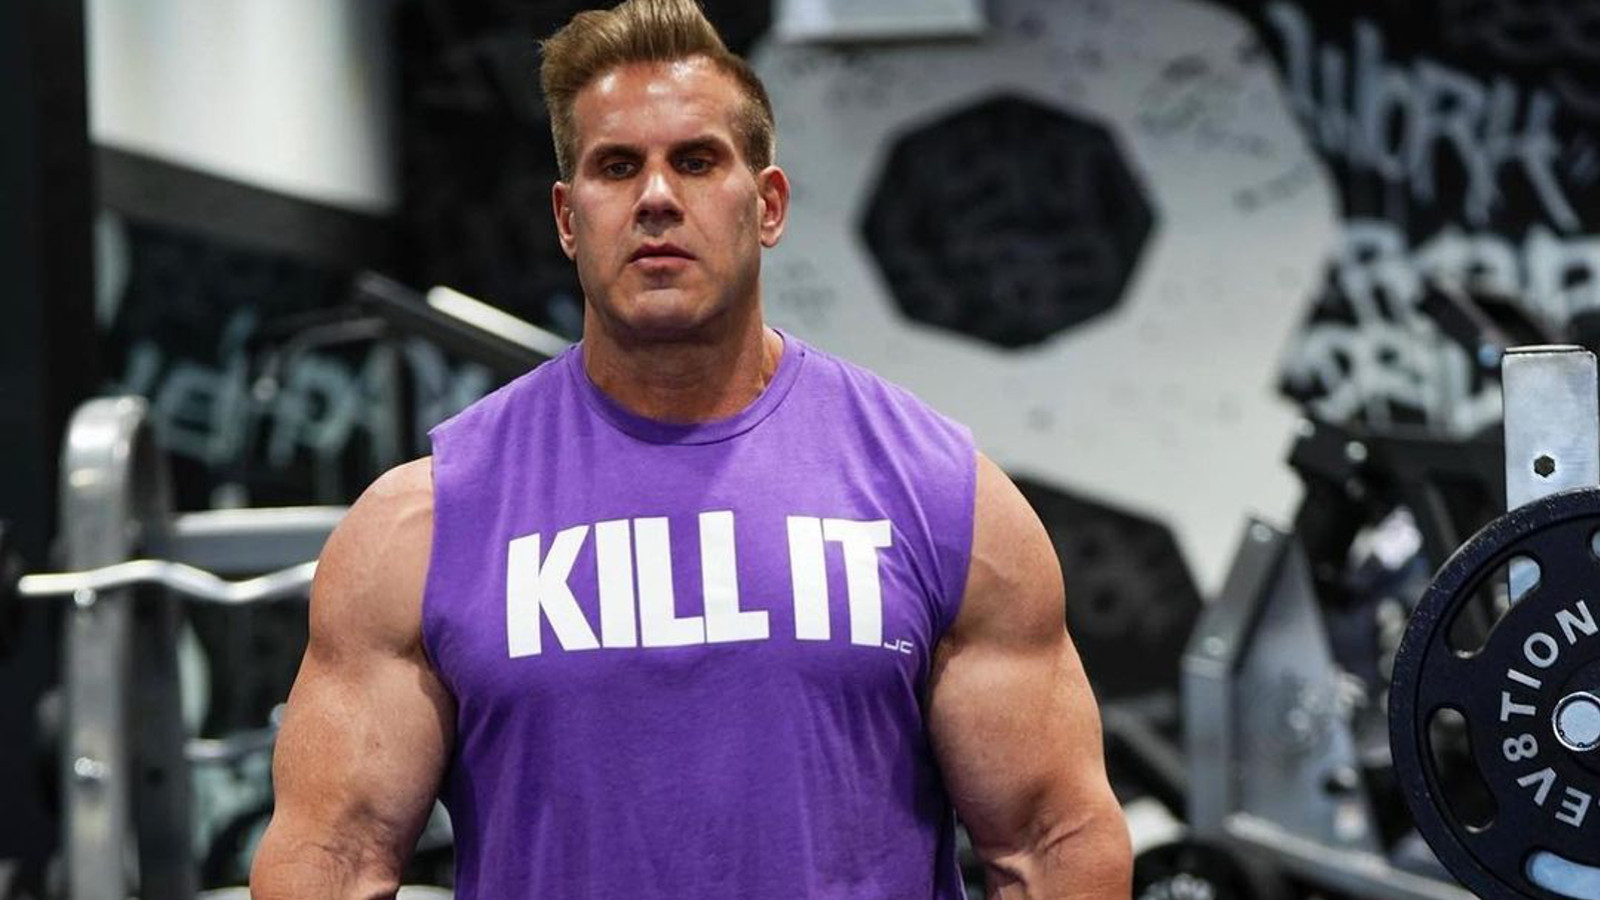 How Strong Was Jay Cutler? Examining the Four-Time Mr. Olympia's Approach  to Training